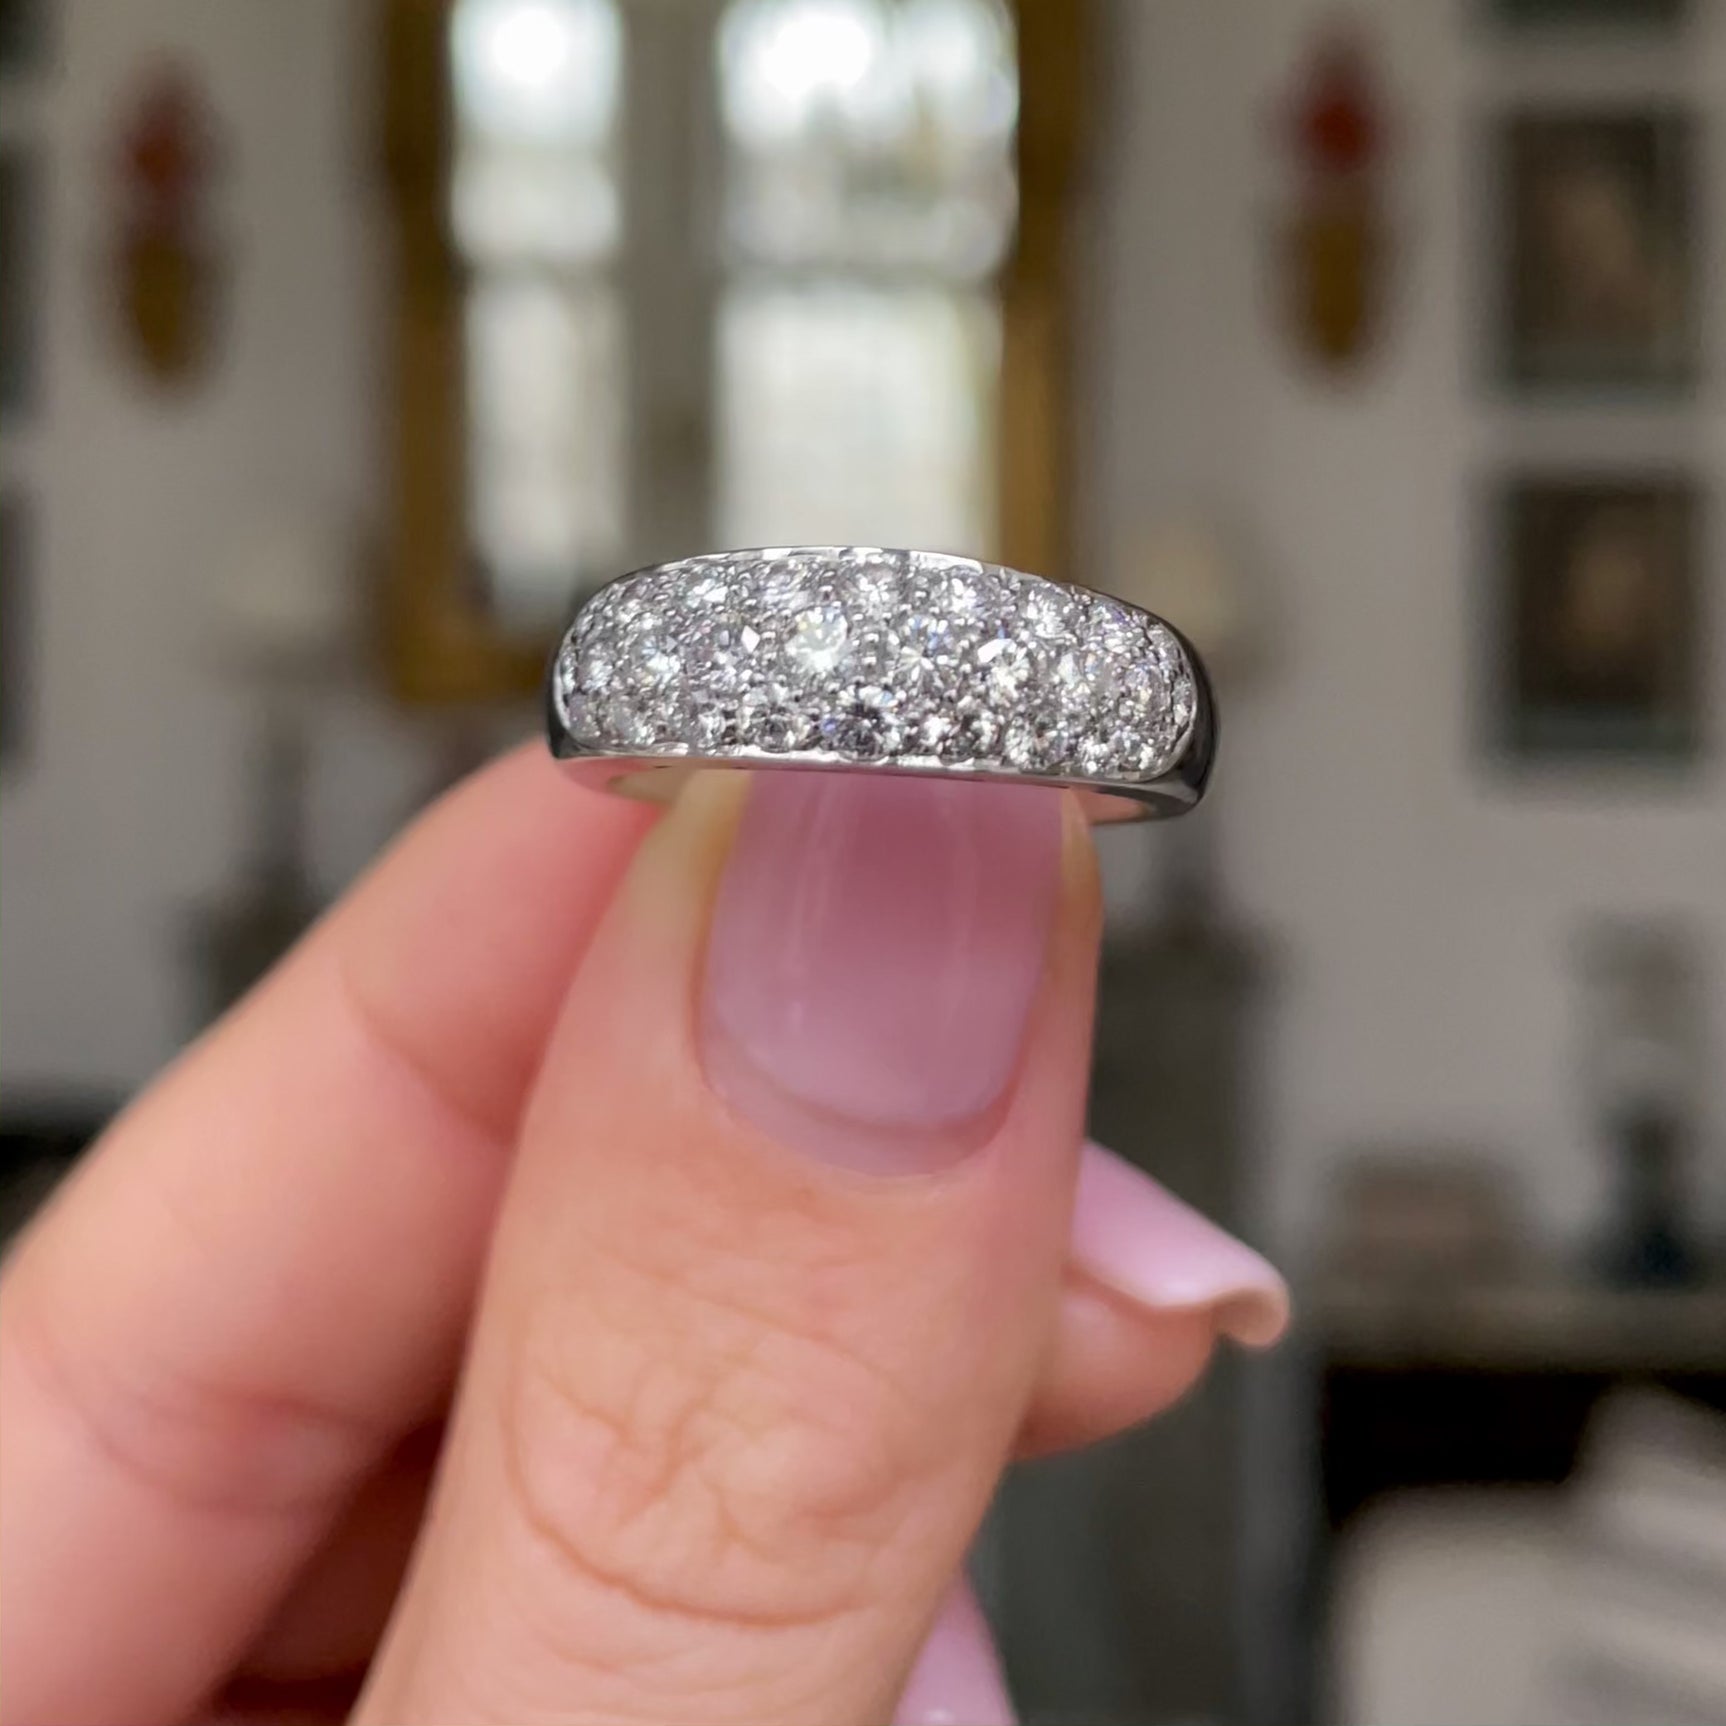 Diamond set platinum band held in fingers and moved around to give perspective.